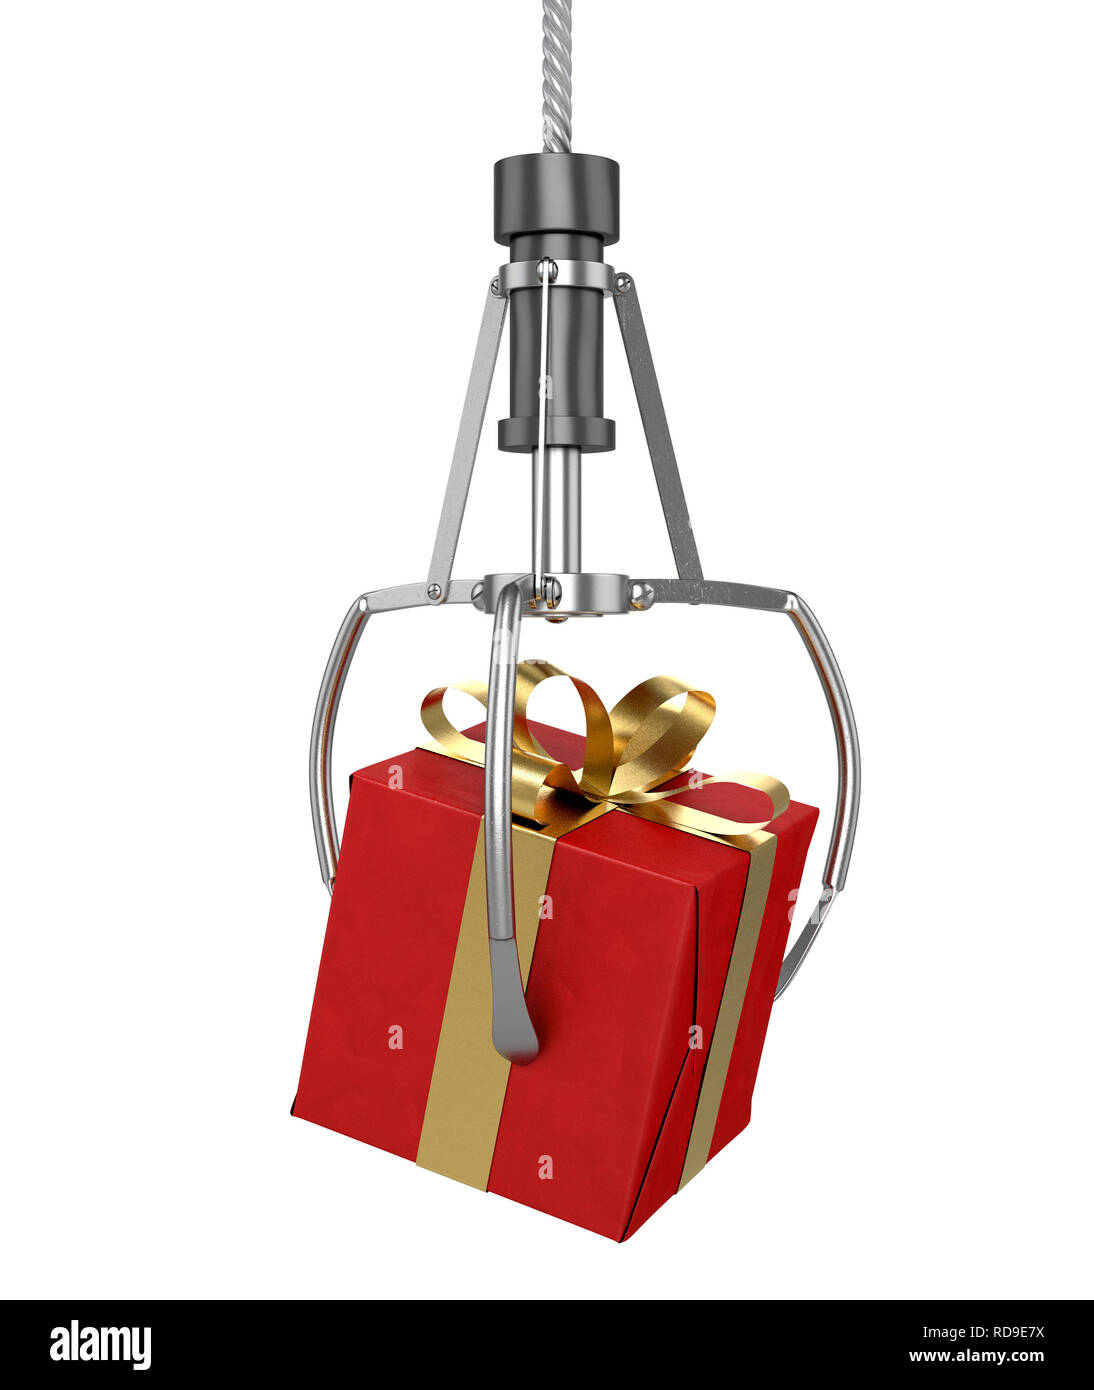 A robotic claw from an arcade type game gripping a small wrapped gift with a gold bow on an isolated white background - 3D render Stock Photo